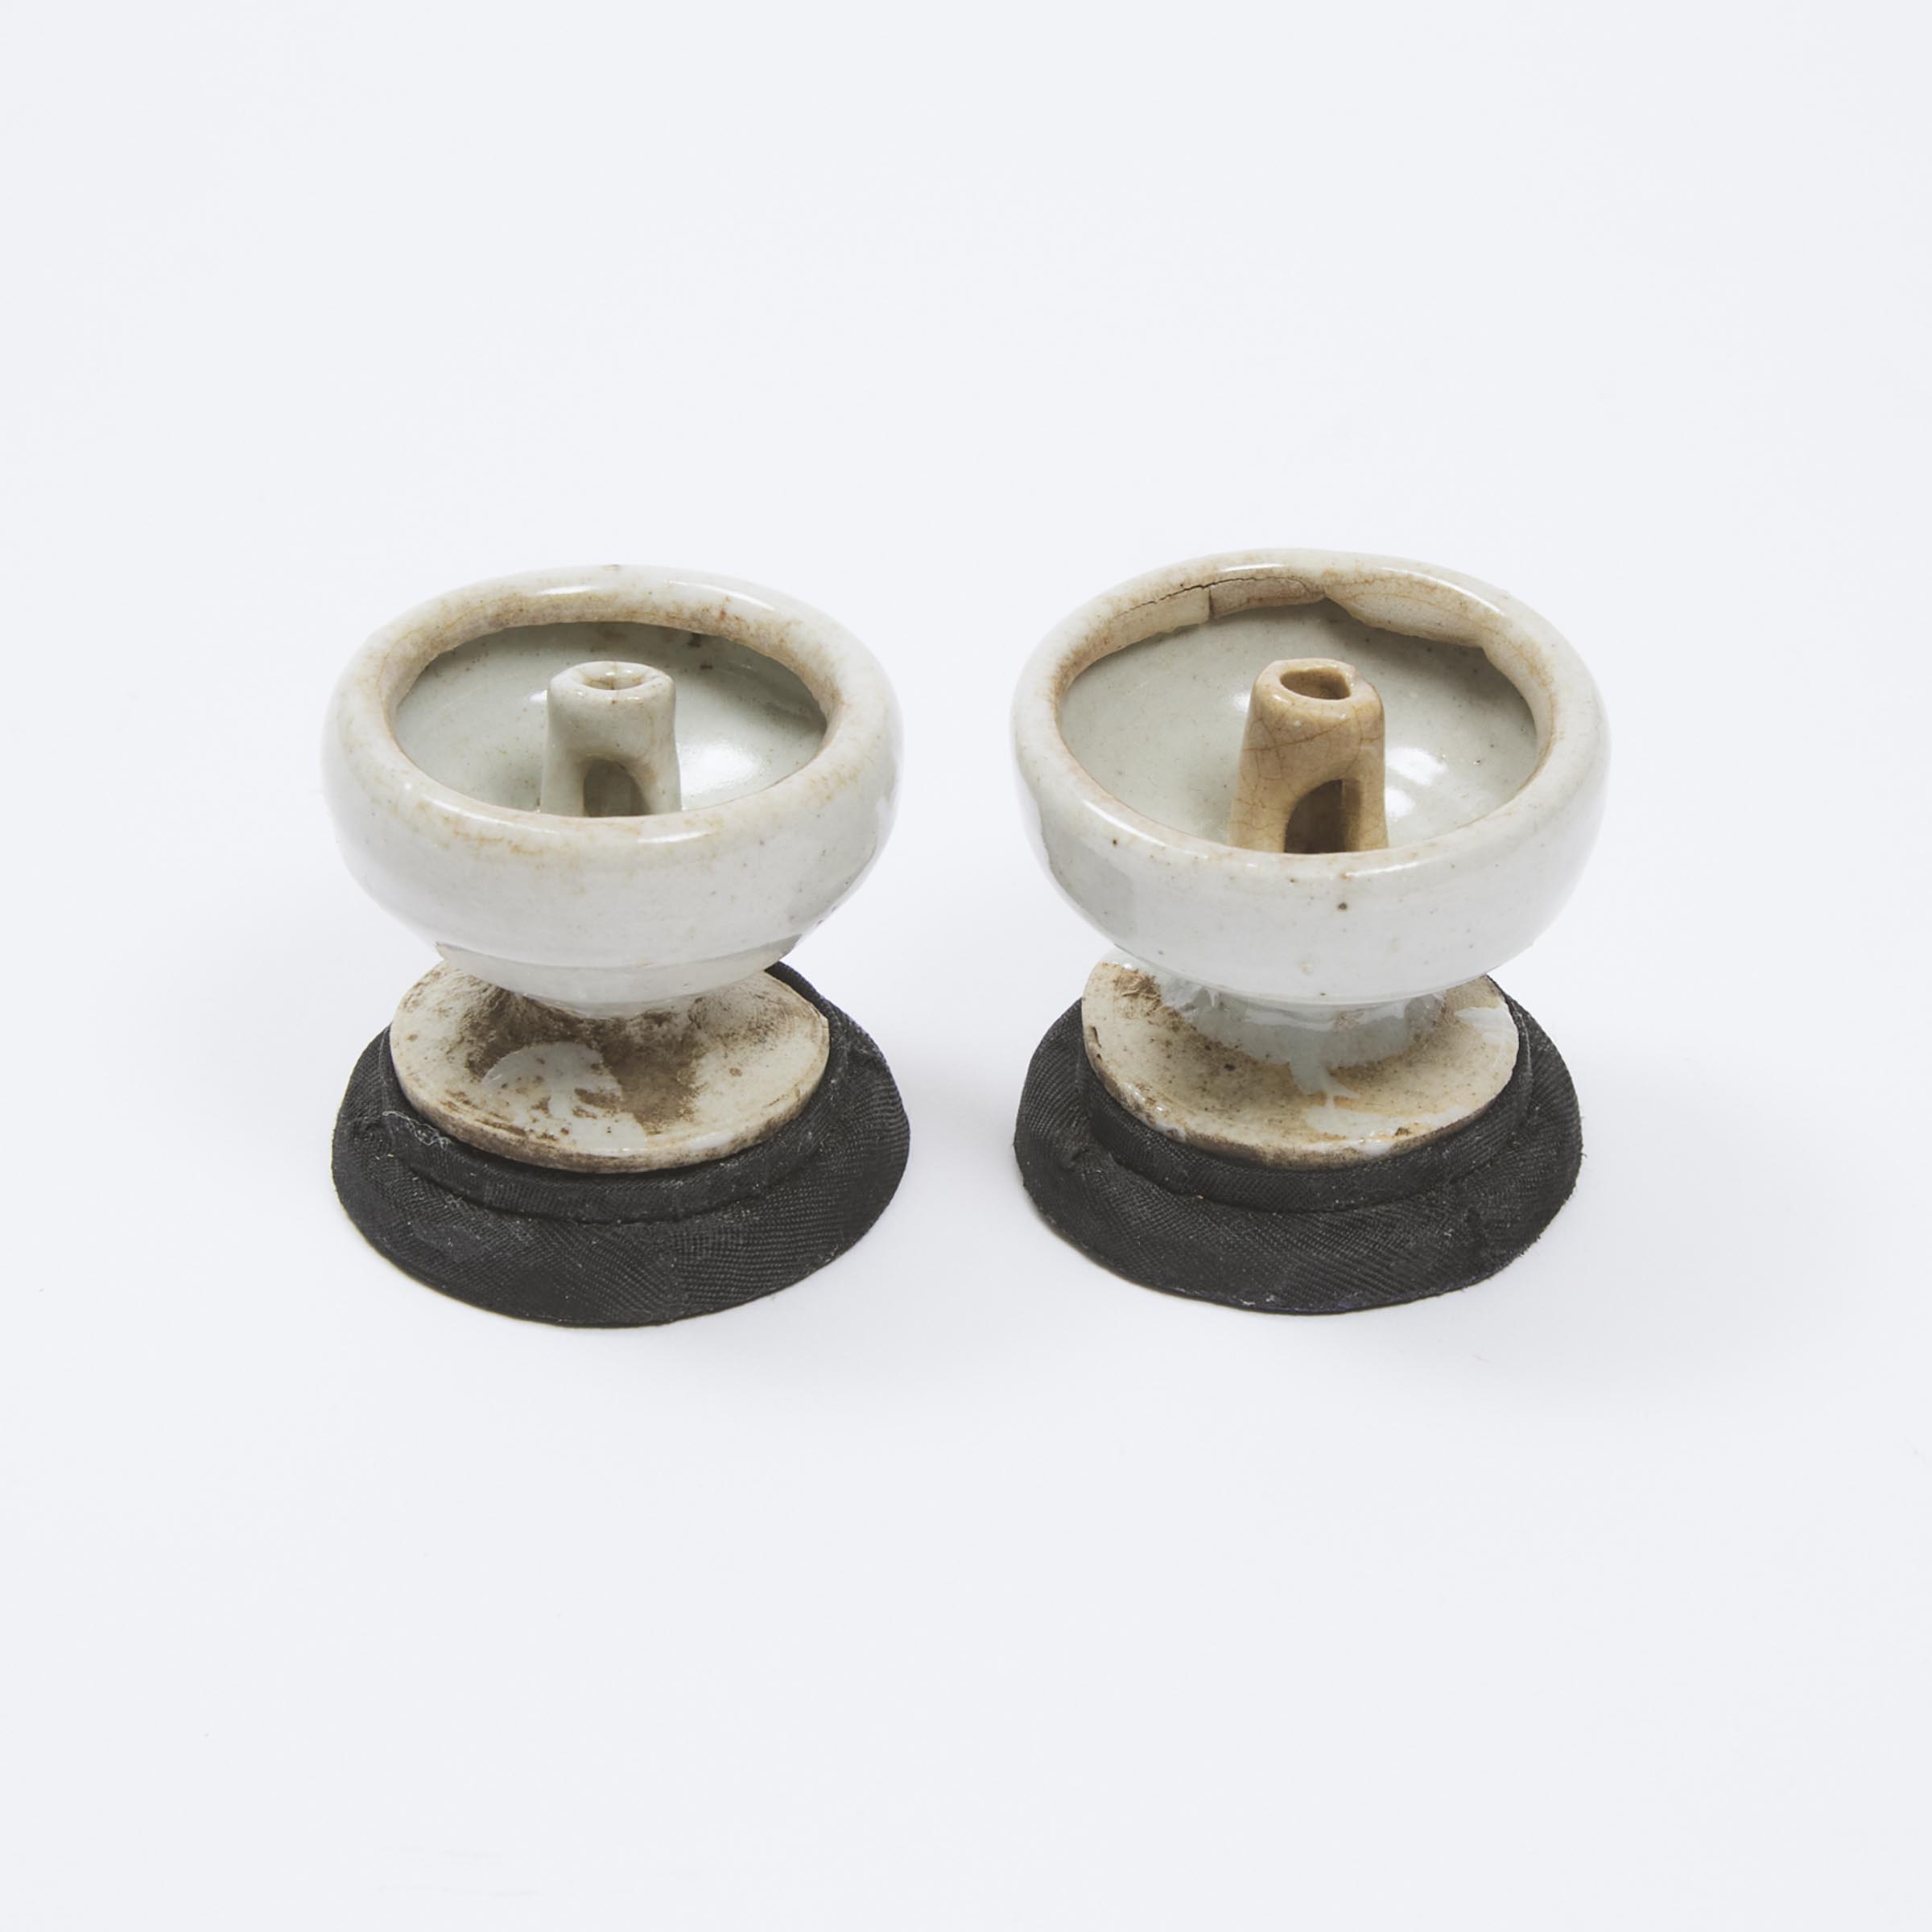 A Pair of Small White-Glazed Oil Lamp Stands, Song Dynasty (960-1279)